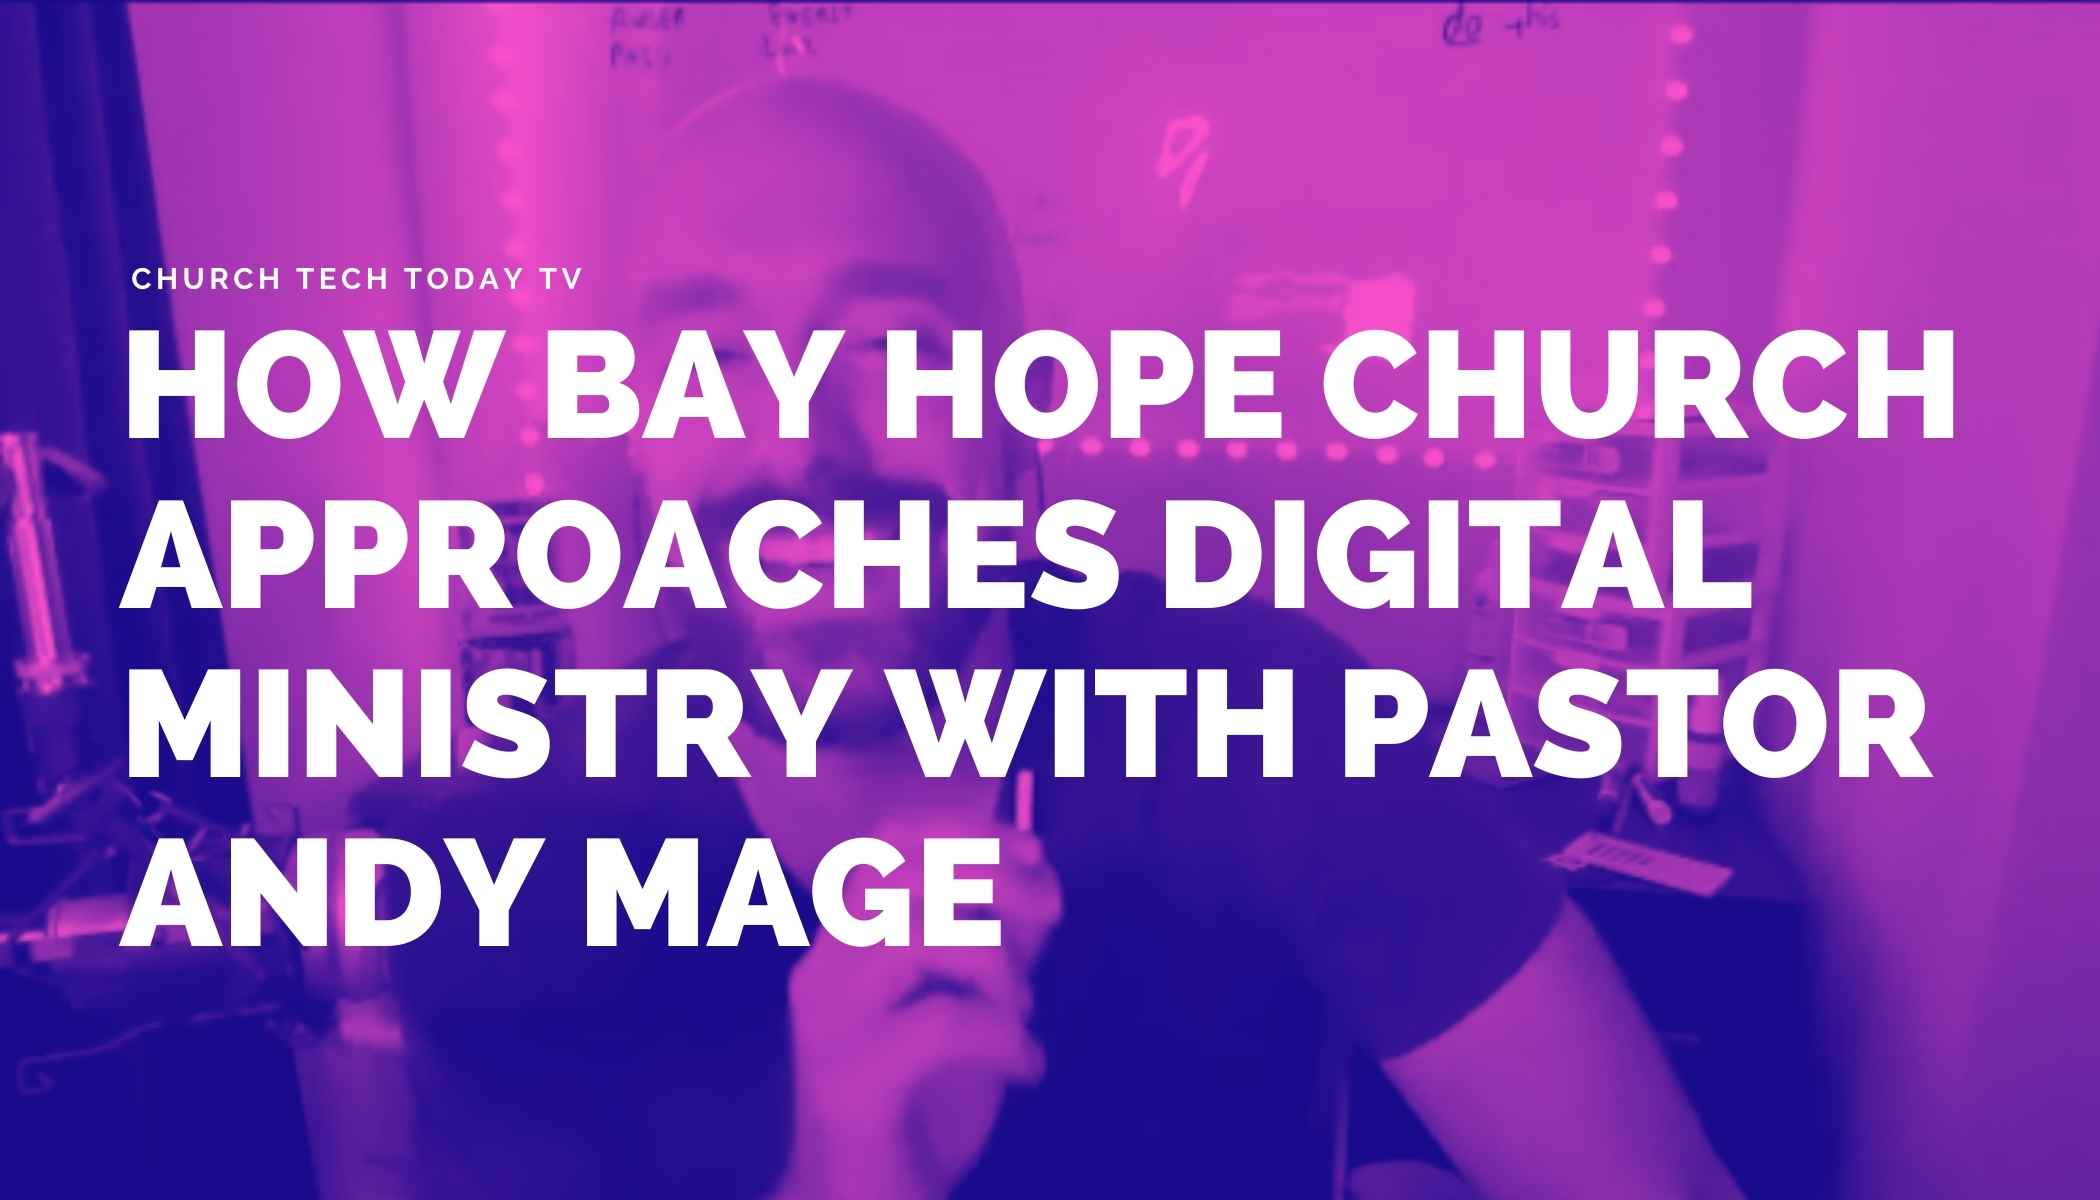 Digital Ministry Andy Mage Interview